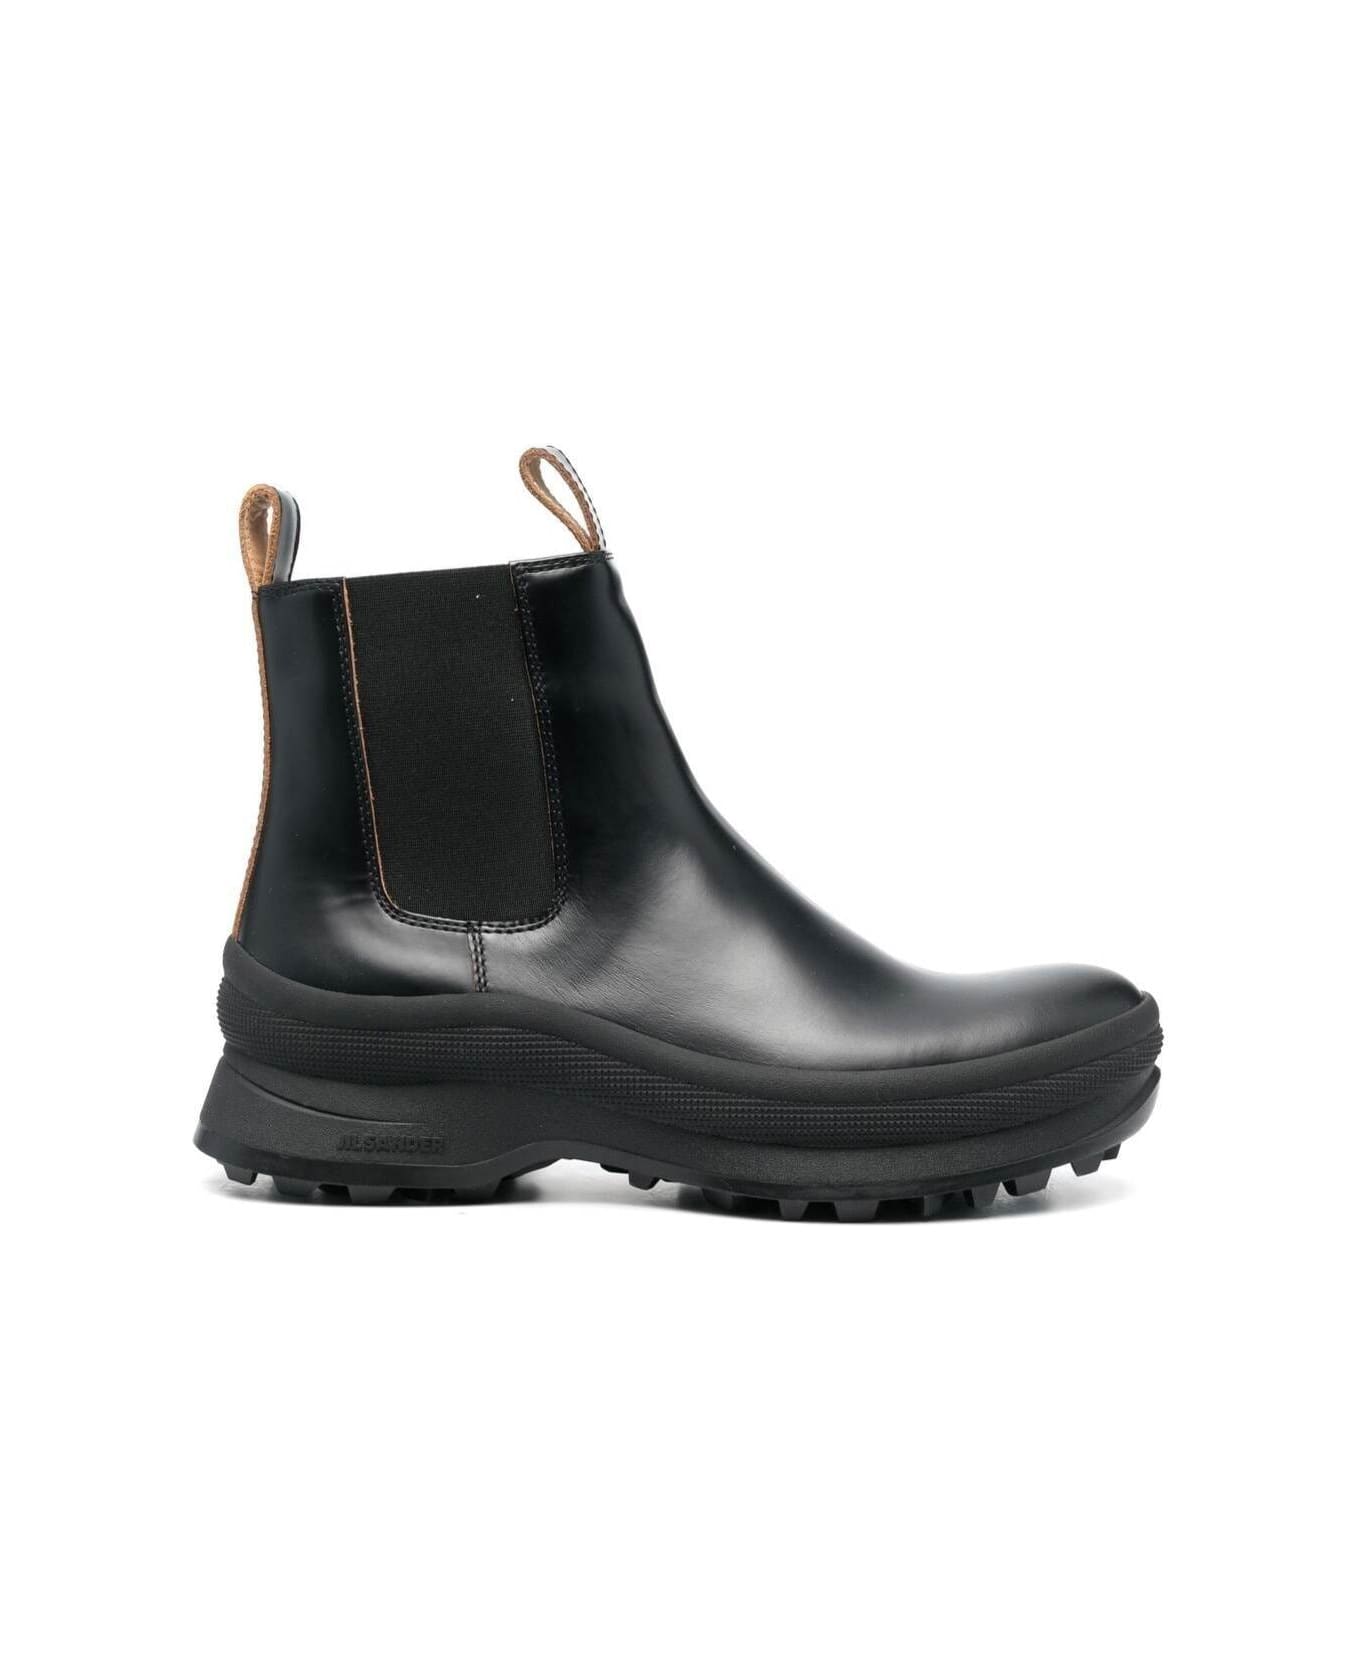 Jil Sander Black Chelsea Boots In Cow Leather Man - Black ブーツ